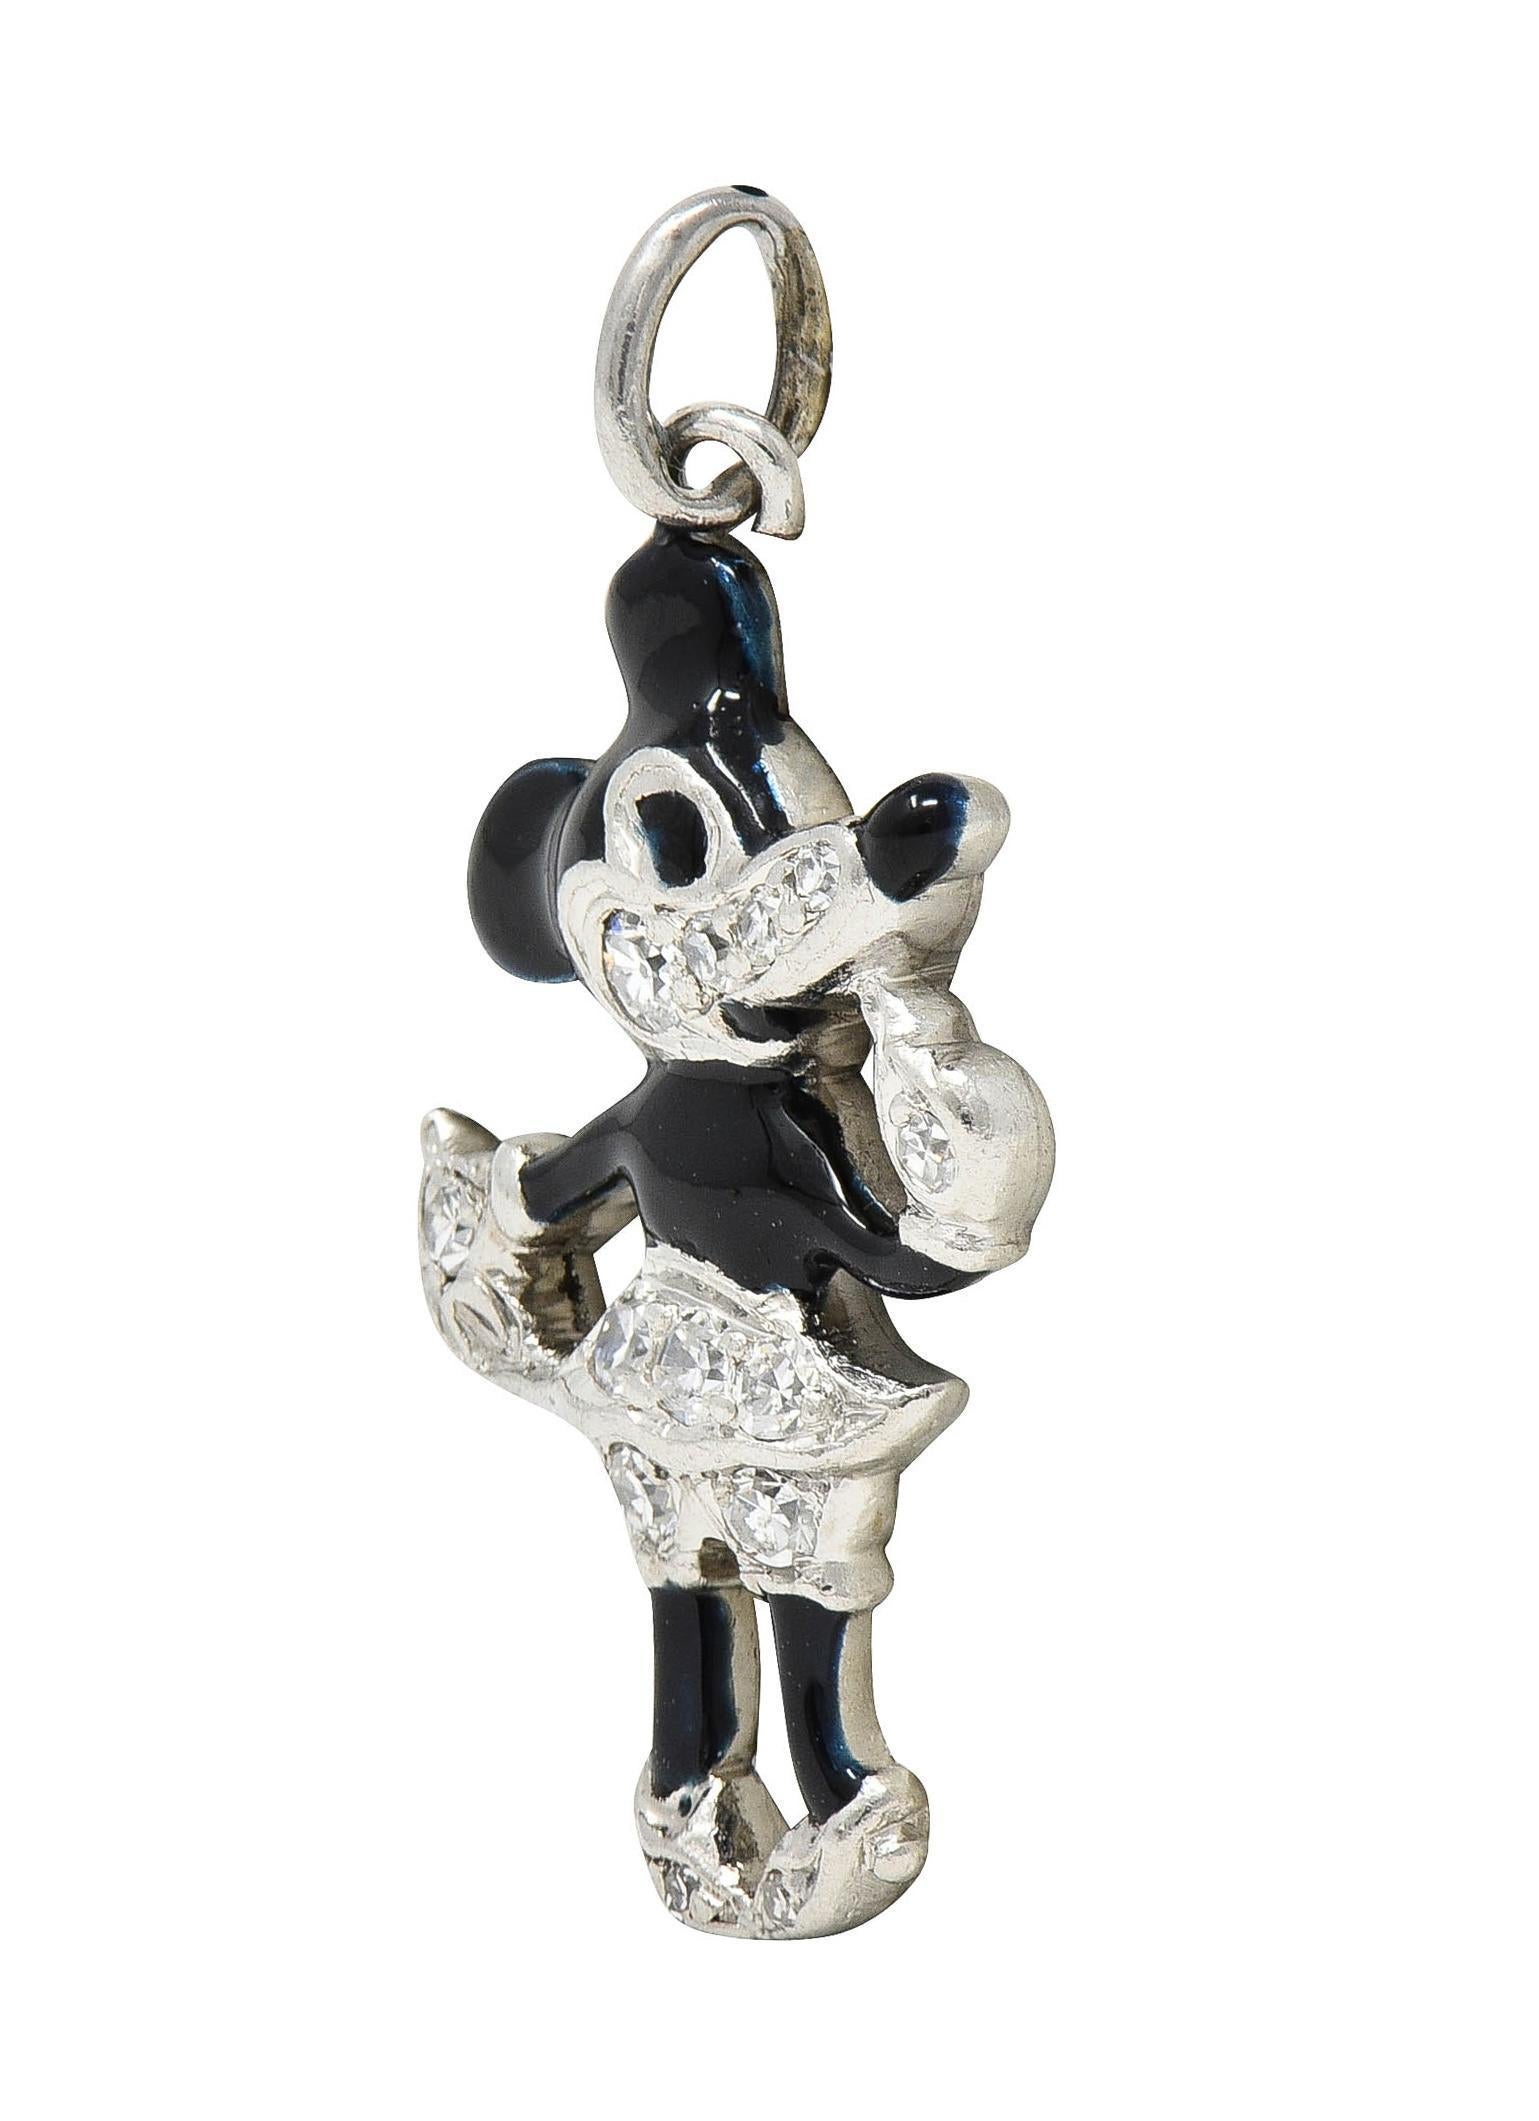 Designed as an early depiction of the Disney cartoon character Minnie Mouse
Depicted standing and wearing a skirt and heels with finger to chin 
Body and nose are glossed with opaque bluish-black enamel - minimal loss
Face, hands, shoes, and skirt